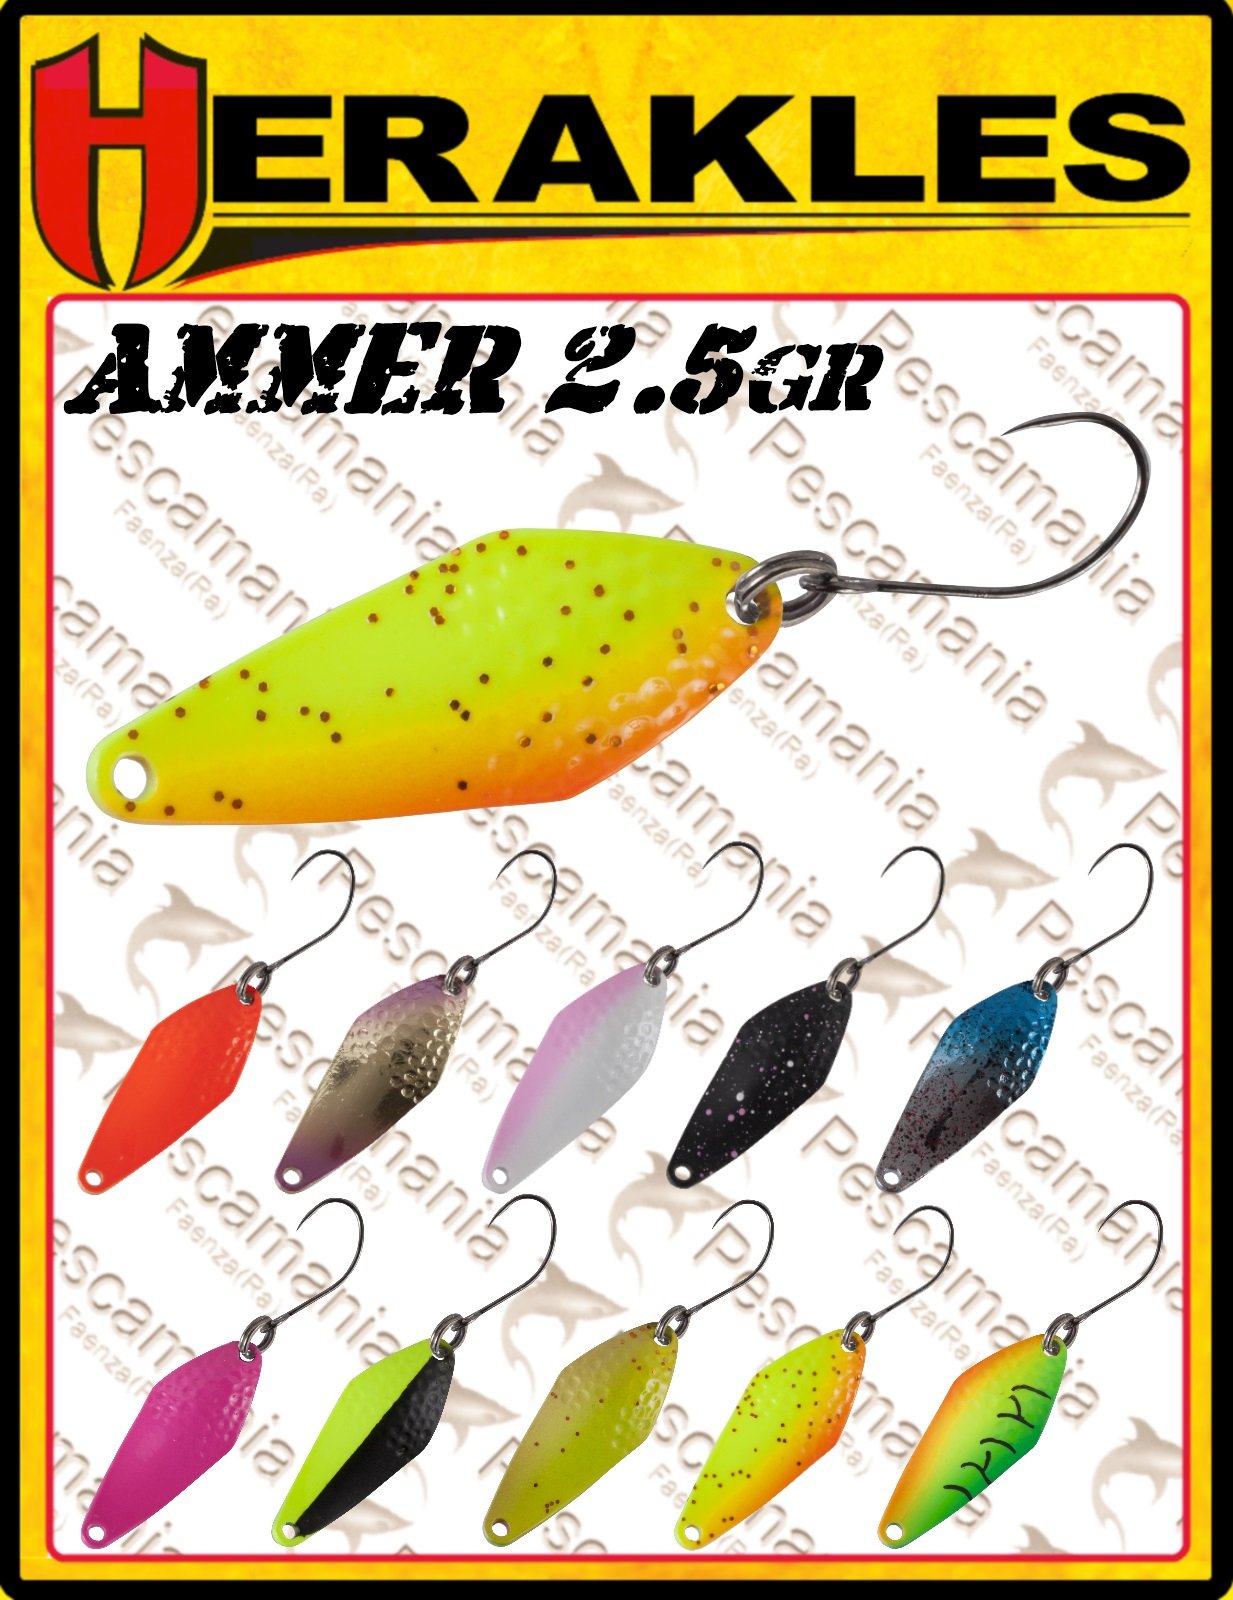 Ammer spoon 2.5 gr color 133